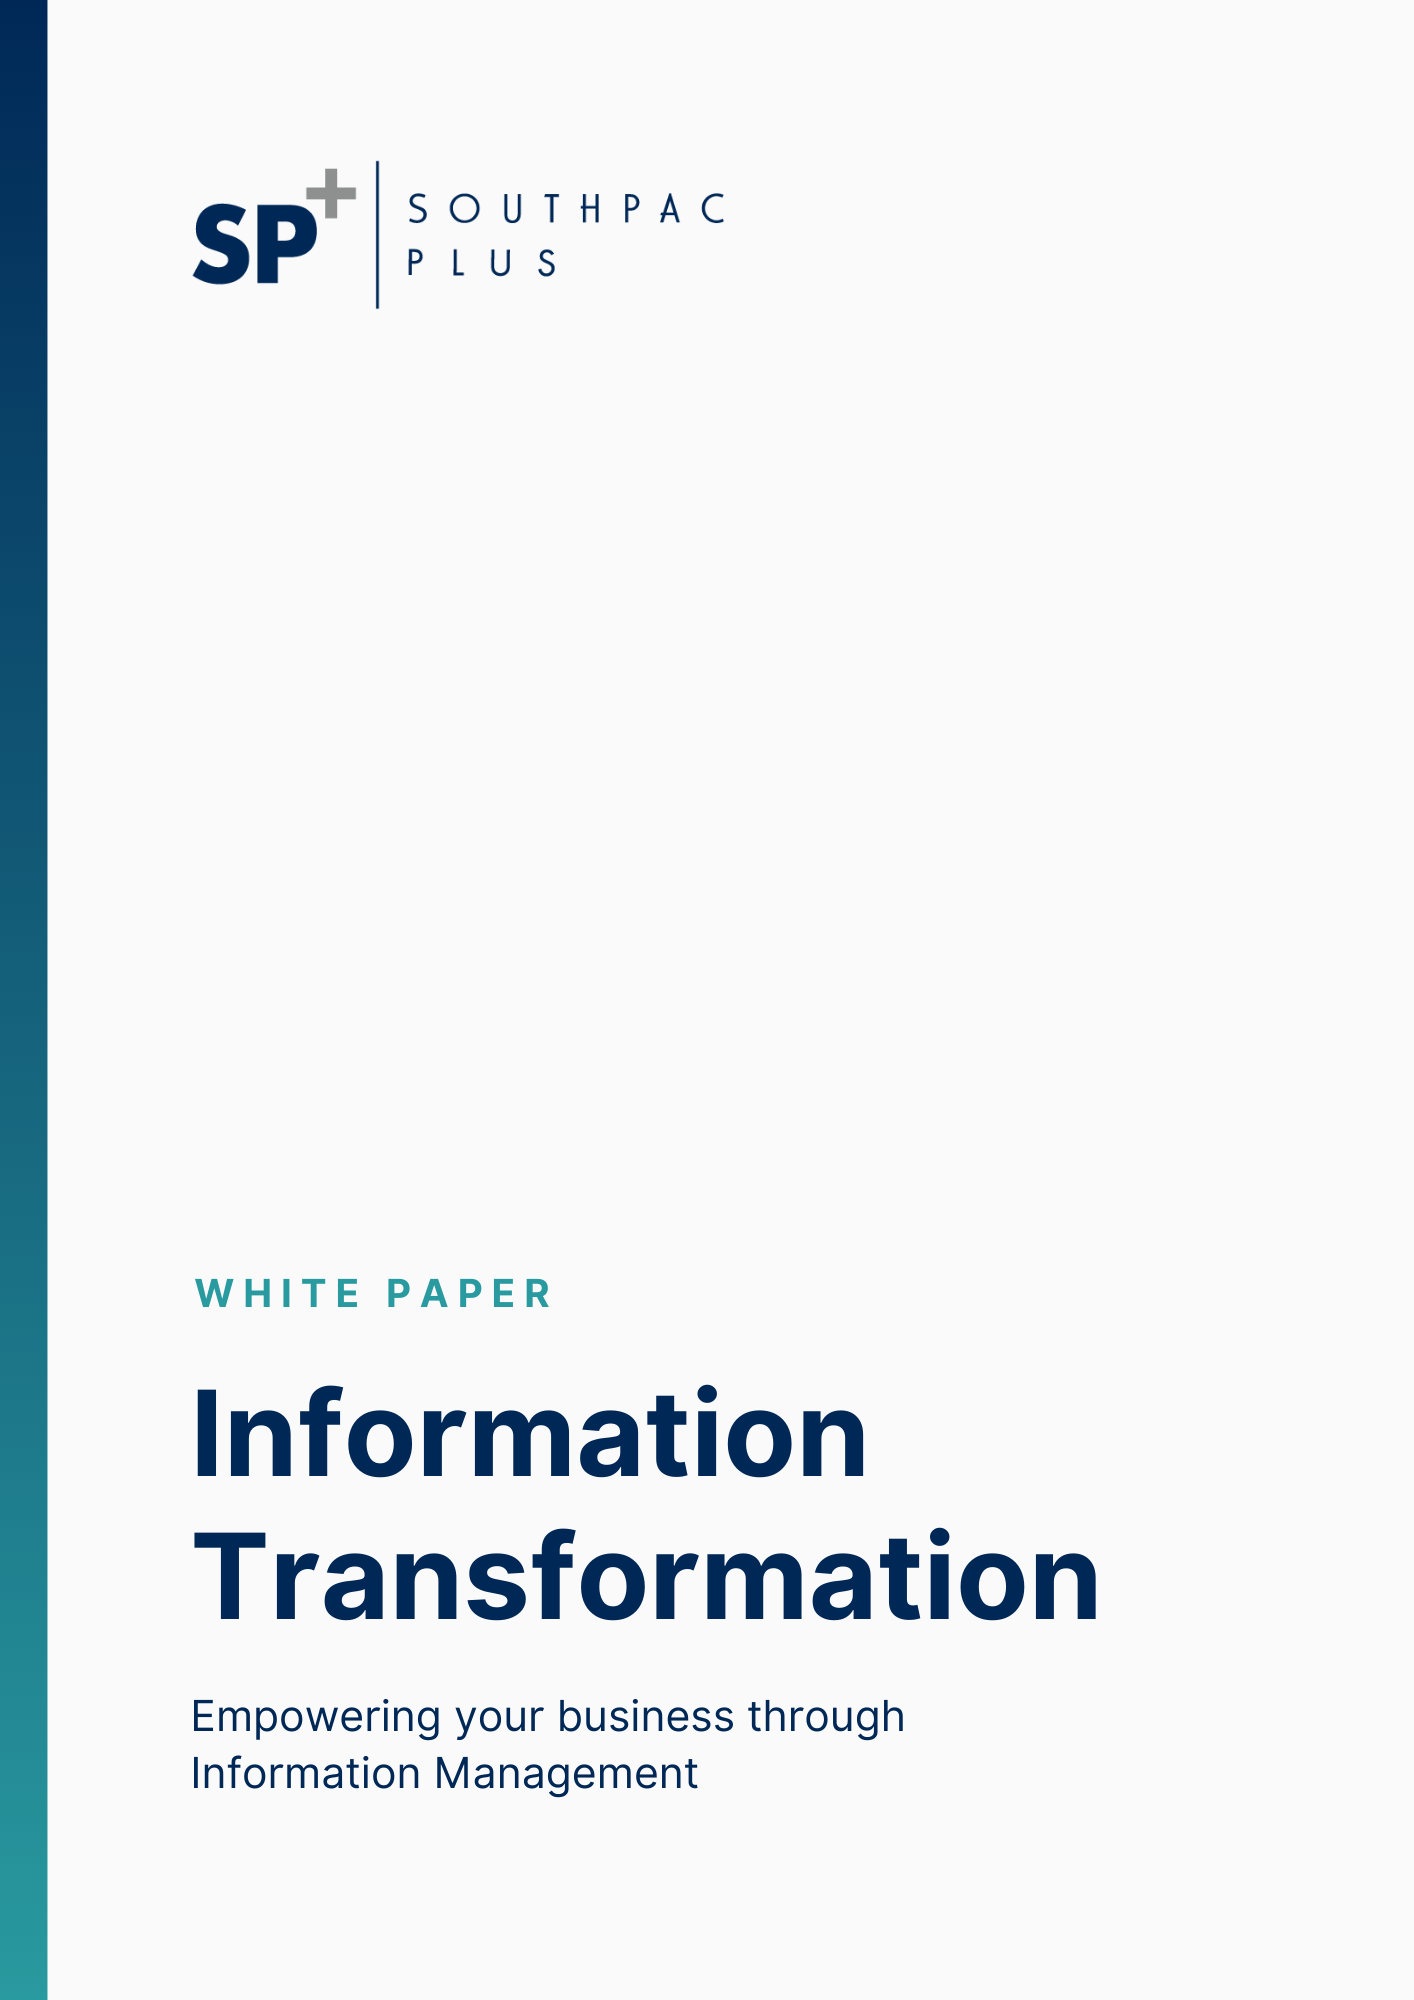 Southpac Plus provides a white paper on information transformation and empowering businesses through information management.